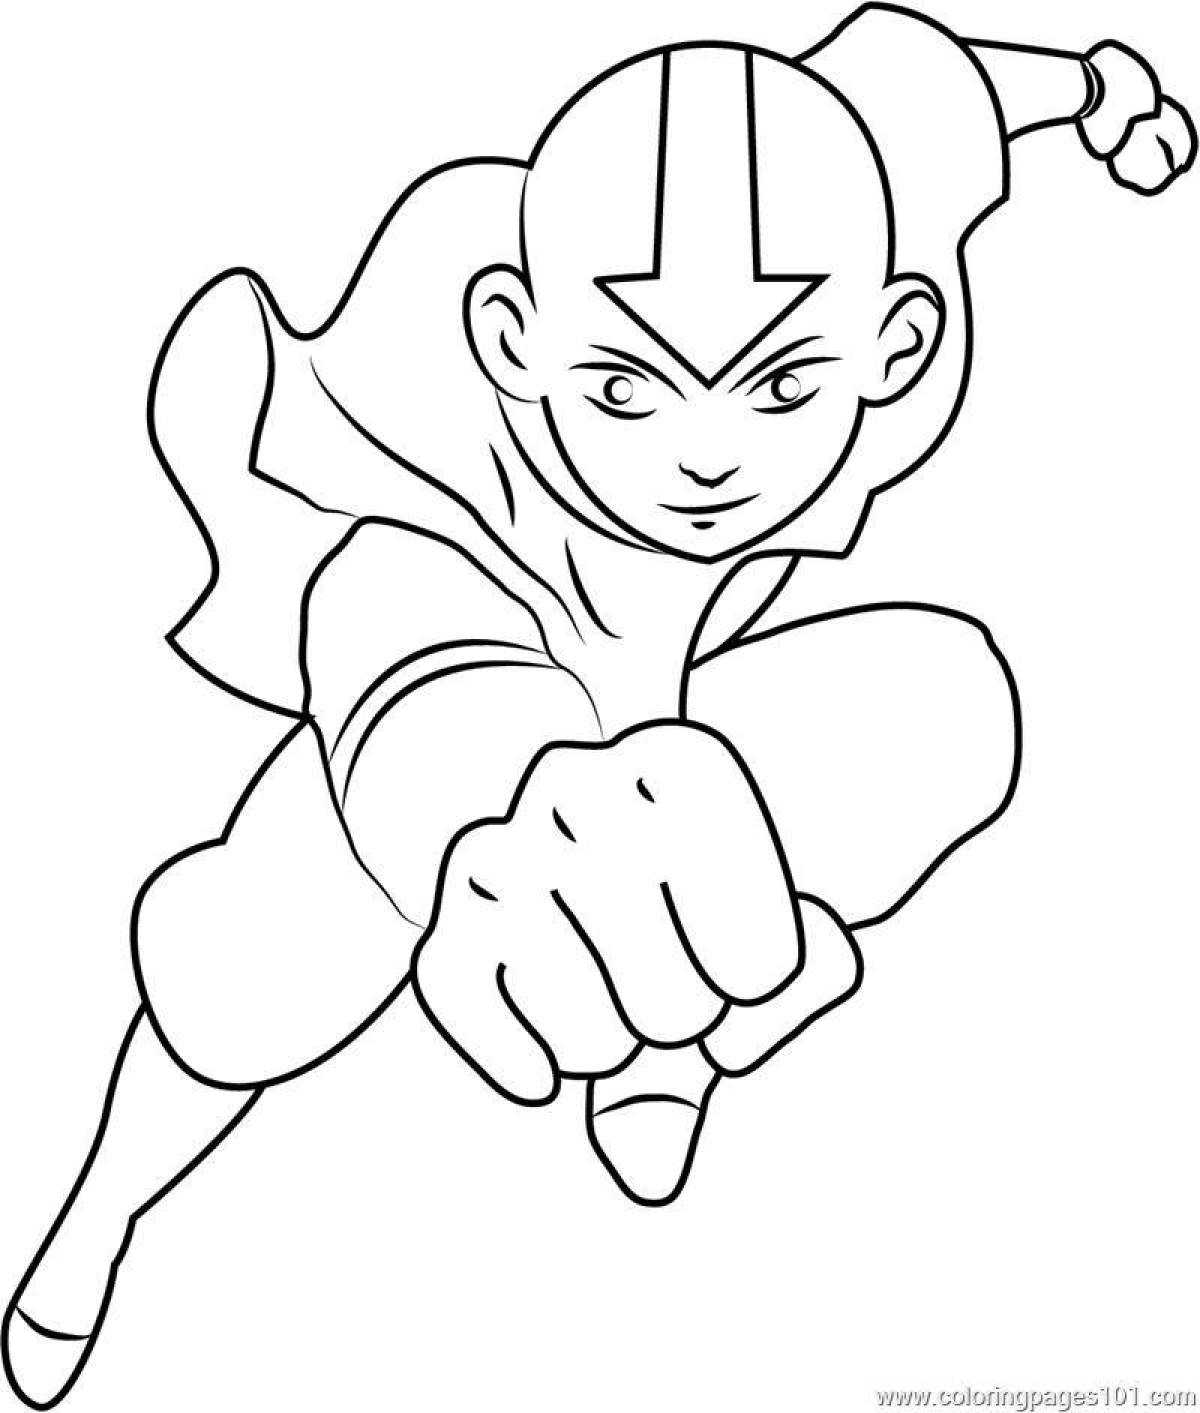 Aang's adorable avatar coloring page